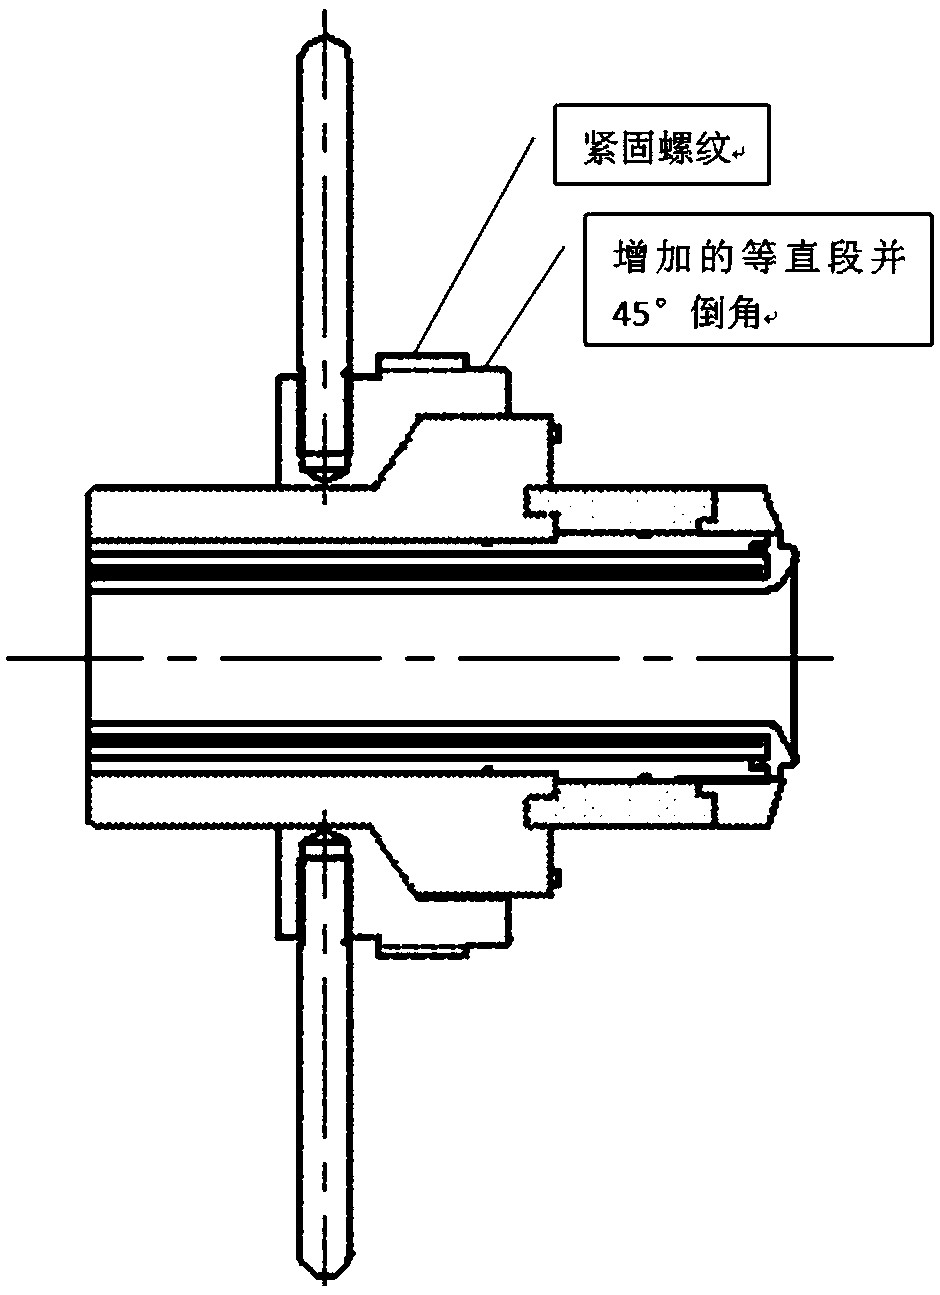 Rear electrode rapid mounting device for tube arc heater